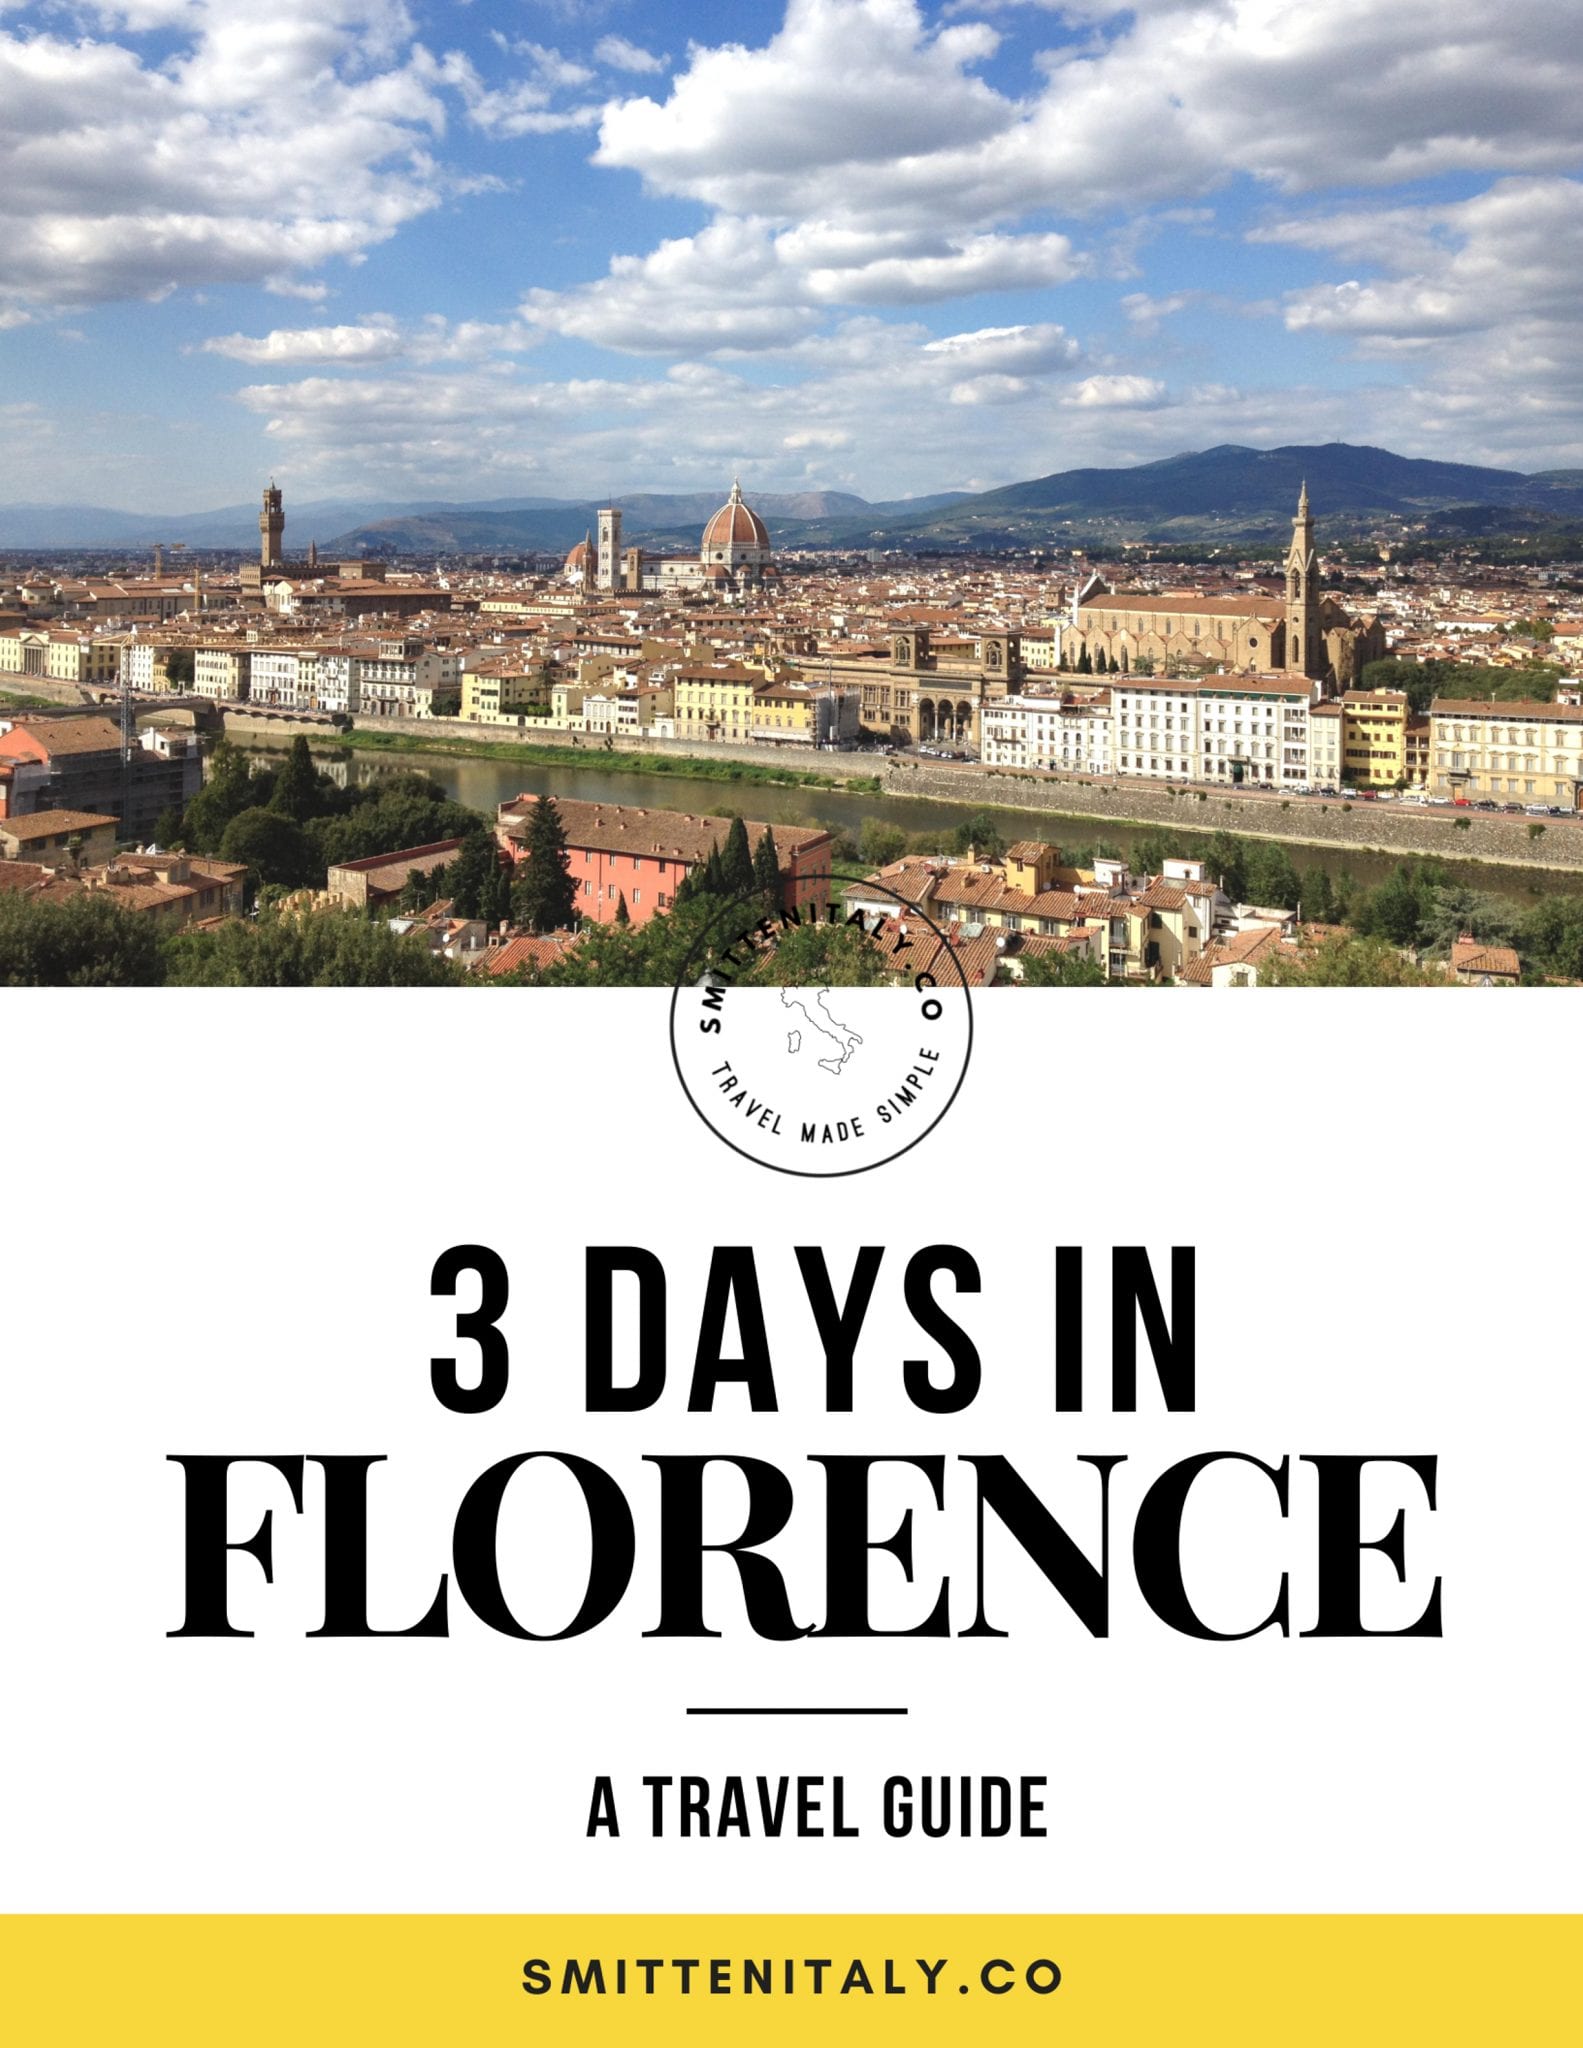 3 days in Florence Travel Guide